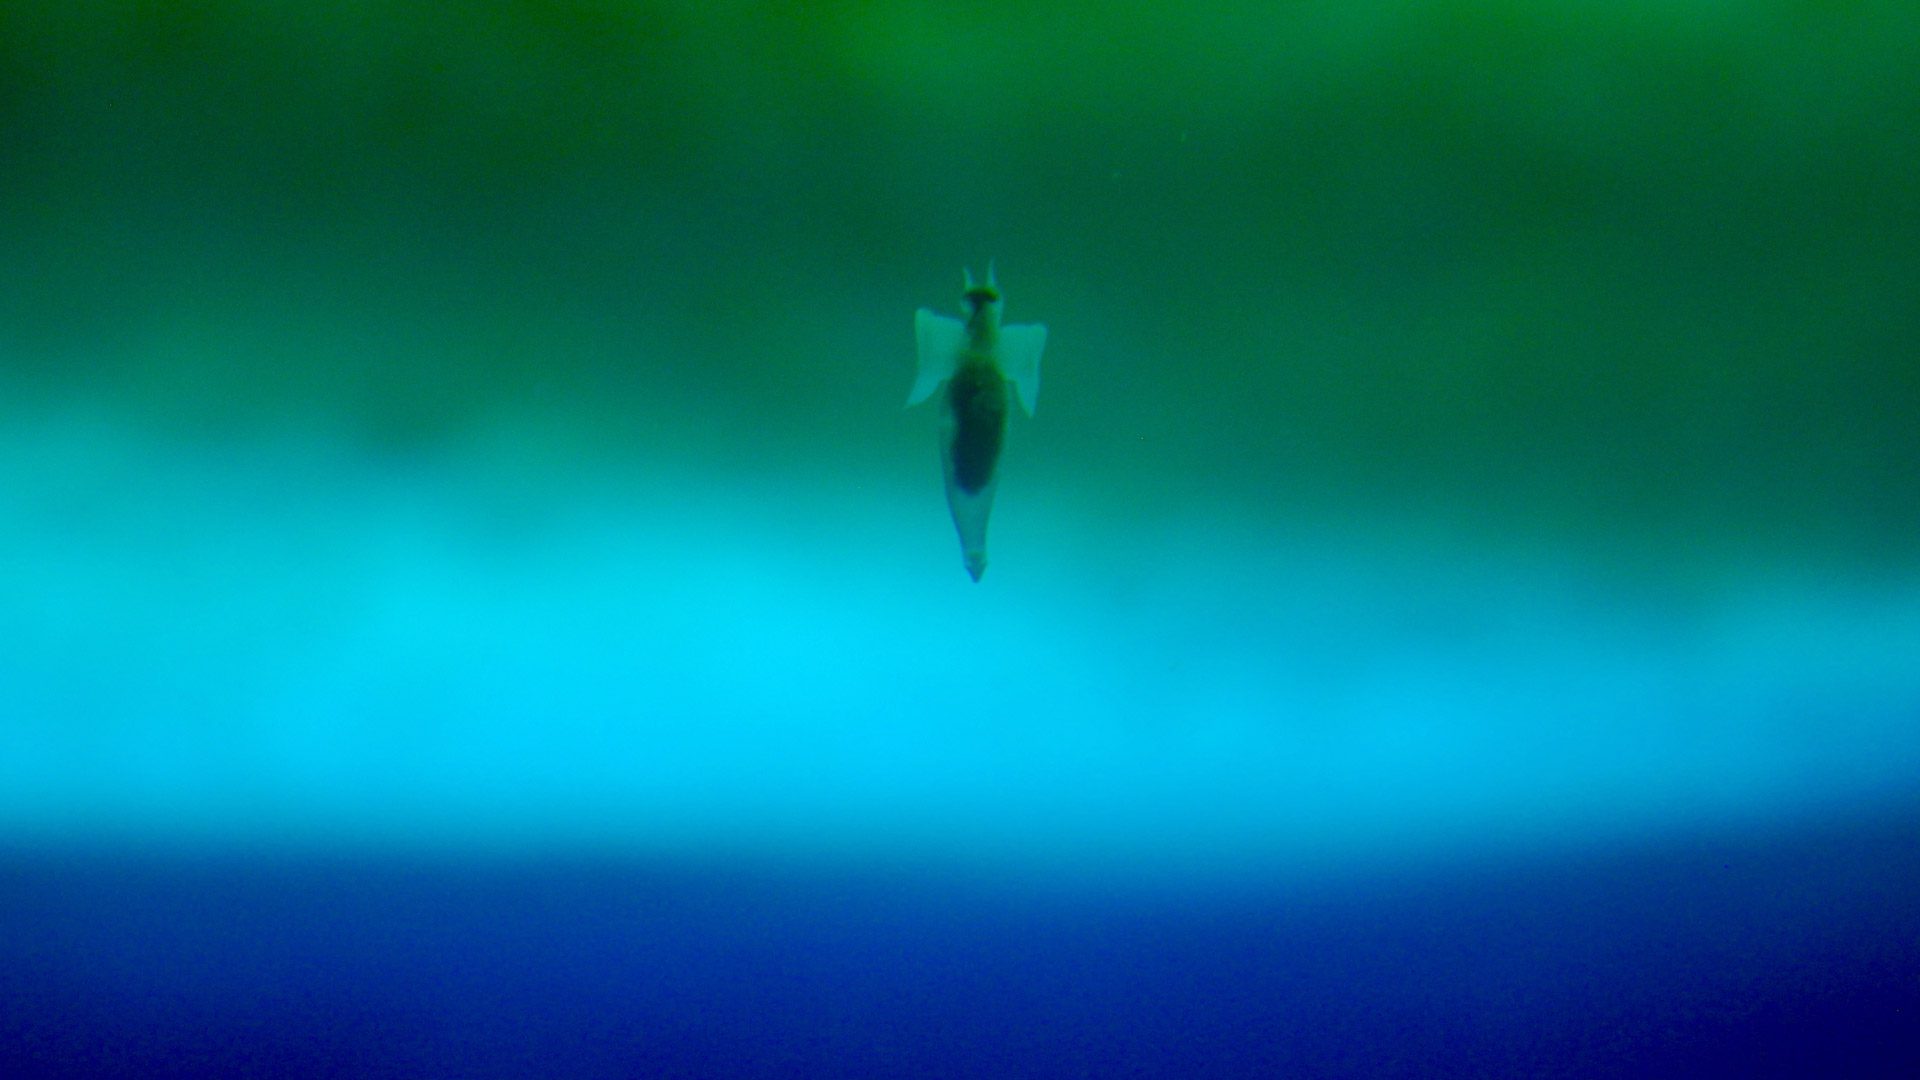 A shell-less pteropod swims under sea ice in Antarctica. Pteropods are small marine snails that use wing-like appendages to "fly" though the water. For that reason, shelled pteropods are commonly called "sea butterflies," while shell-less pteropods are referred to as "sea angels." These delicate animals play an important role in the food web as key prey for many fishes, seabirds, and whales. The shelled variety is under threat from ocean acidification, caused by increasing atmospheric carbon dioxide (CO2). As excess CO2 dissolves into the ocean, it's converted to corrosive carbonic acid, causing problems for marine animals that use calcium carbonate to build shells or skeletons. While acidification won't directly affect shell-less pteropods, it will impact their food supply, since they dine exclusively on their shelled relatives. Photo by Laura Stevens, ©Woods Hole Oceanographic Institution